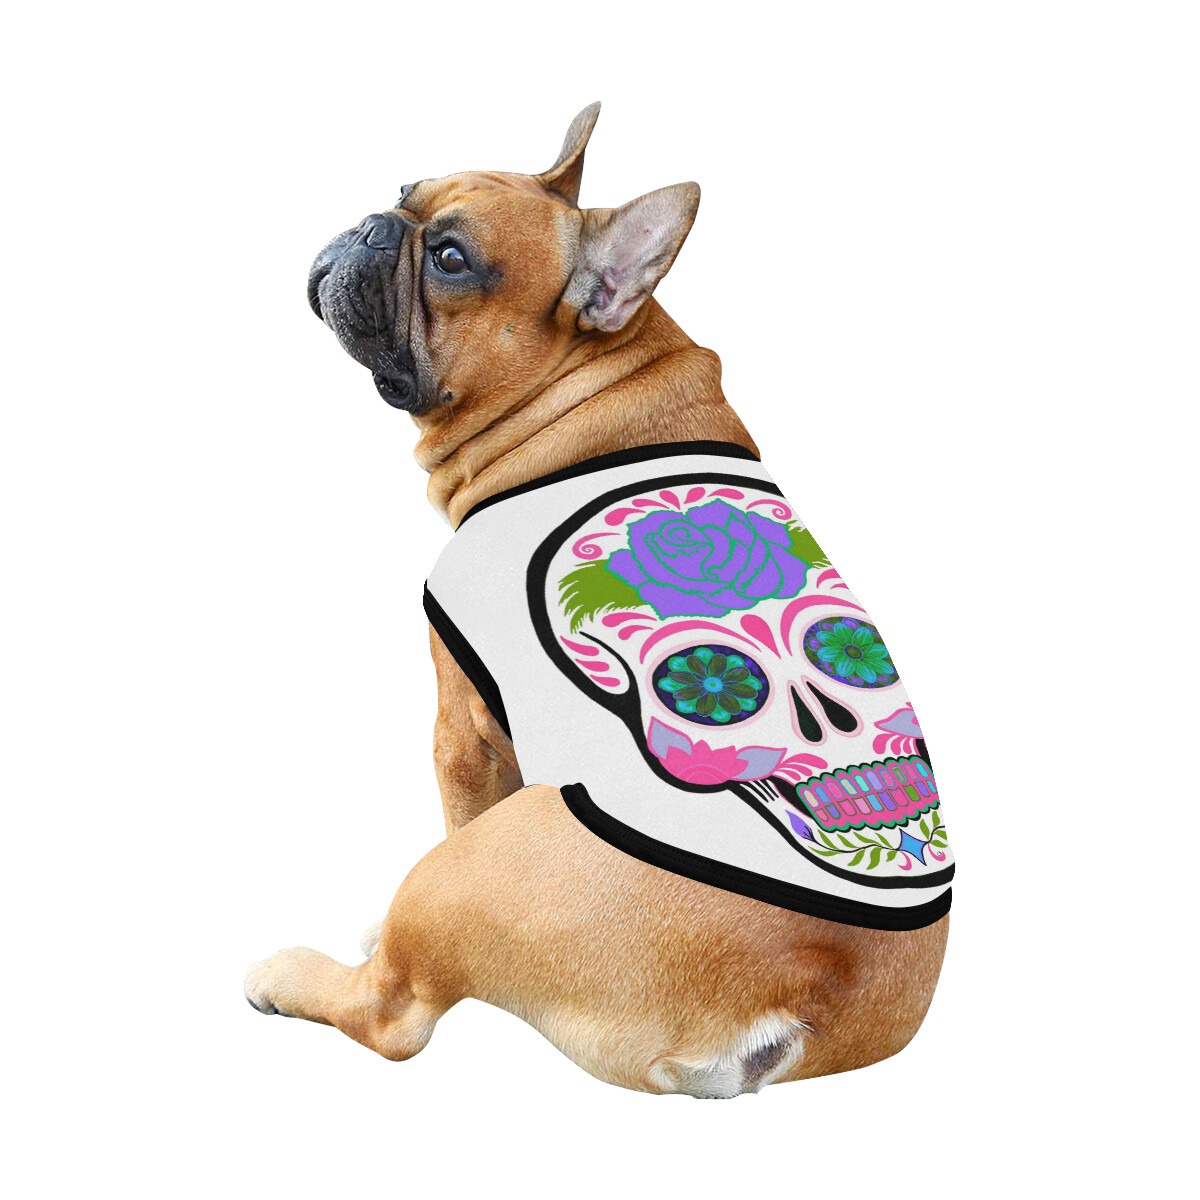 🐕 Skull Day of the dead Dog Dog shirt, Dog Tank Top, Dog t-shirt, Dog clothes, Gifts, front back print, 7 sizes XS to 3XL, dog gifts, 32 colors, white